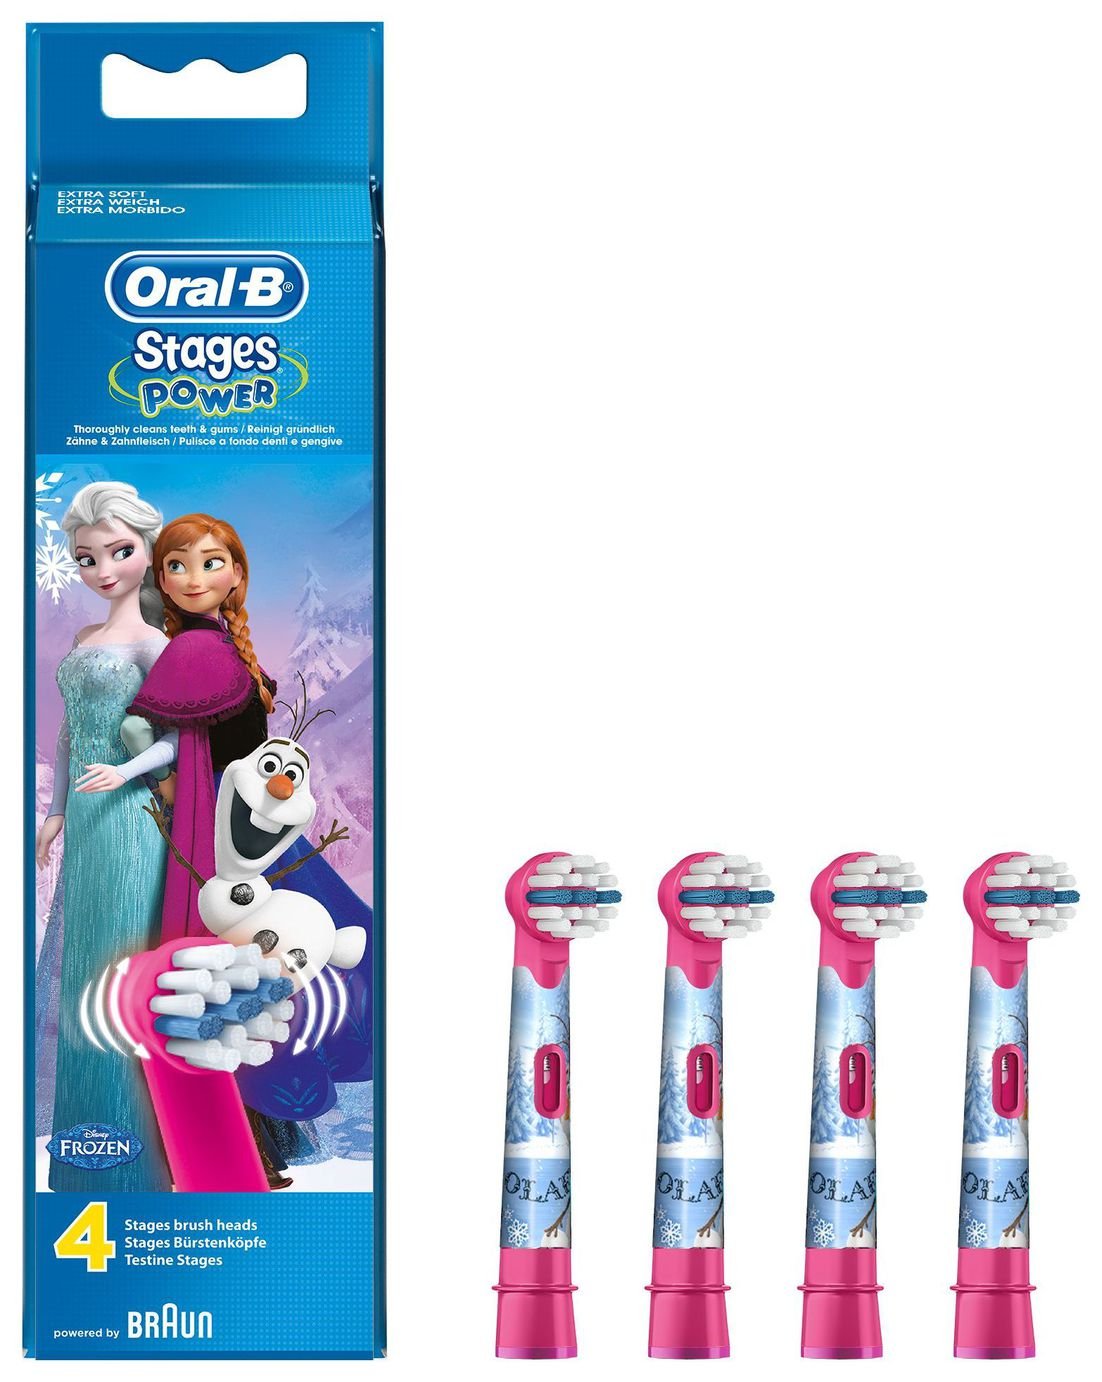 Oral-B Disney Frozen Kids Electric Toothbrush Heads - 4 Pack